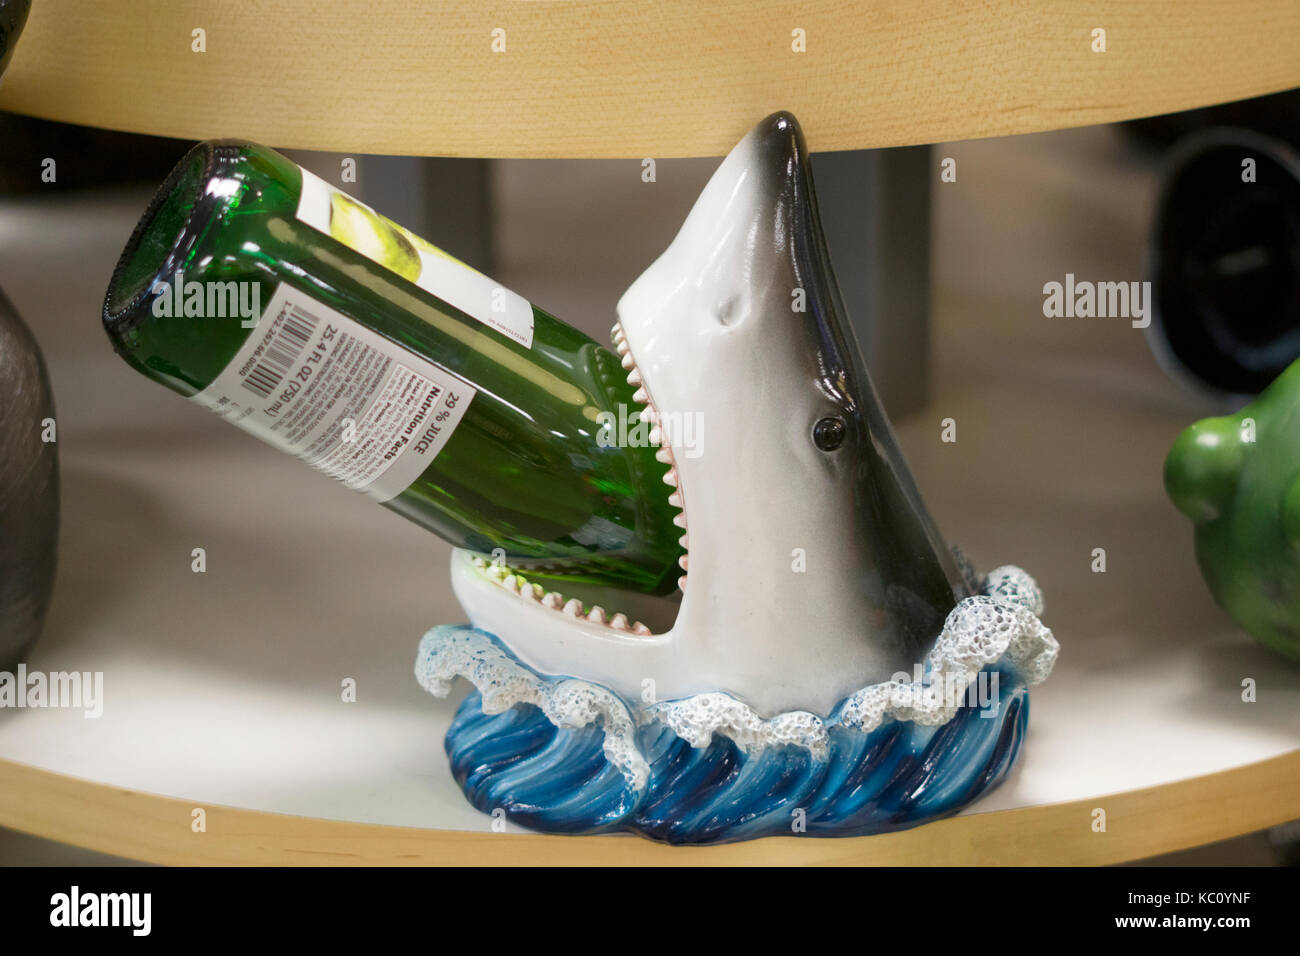 A shark wine bottle holder for sale at Gizmos & Gadgets at the Tanger Outlet Mall in Deer Park, Long Island, New York. Stock Photo